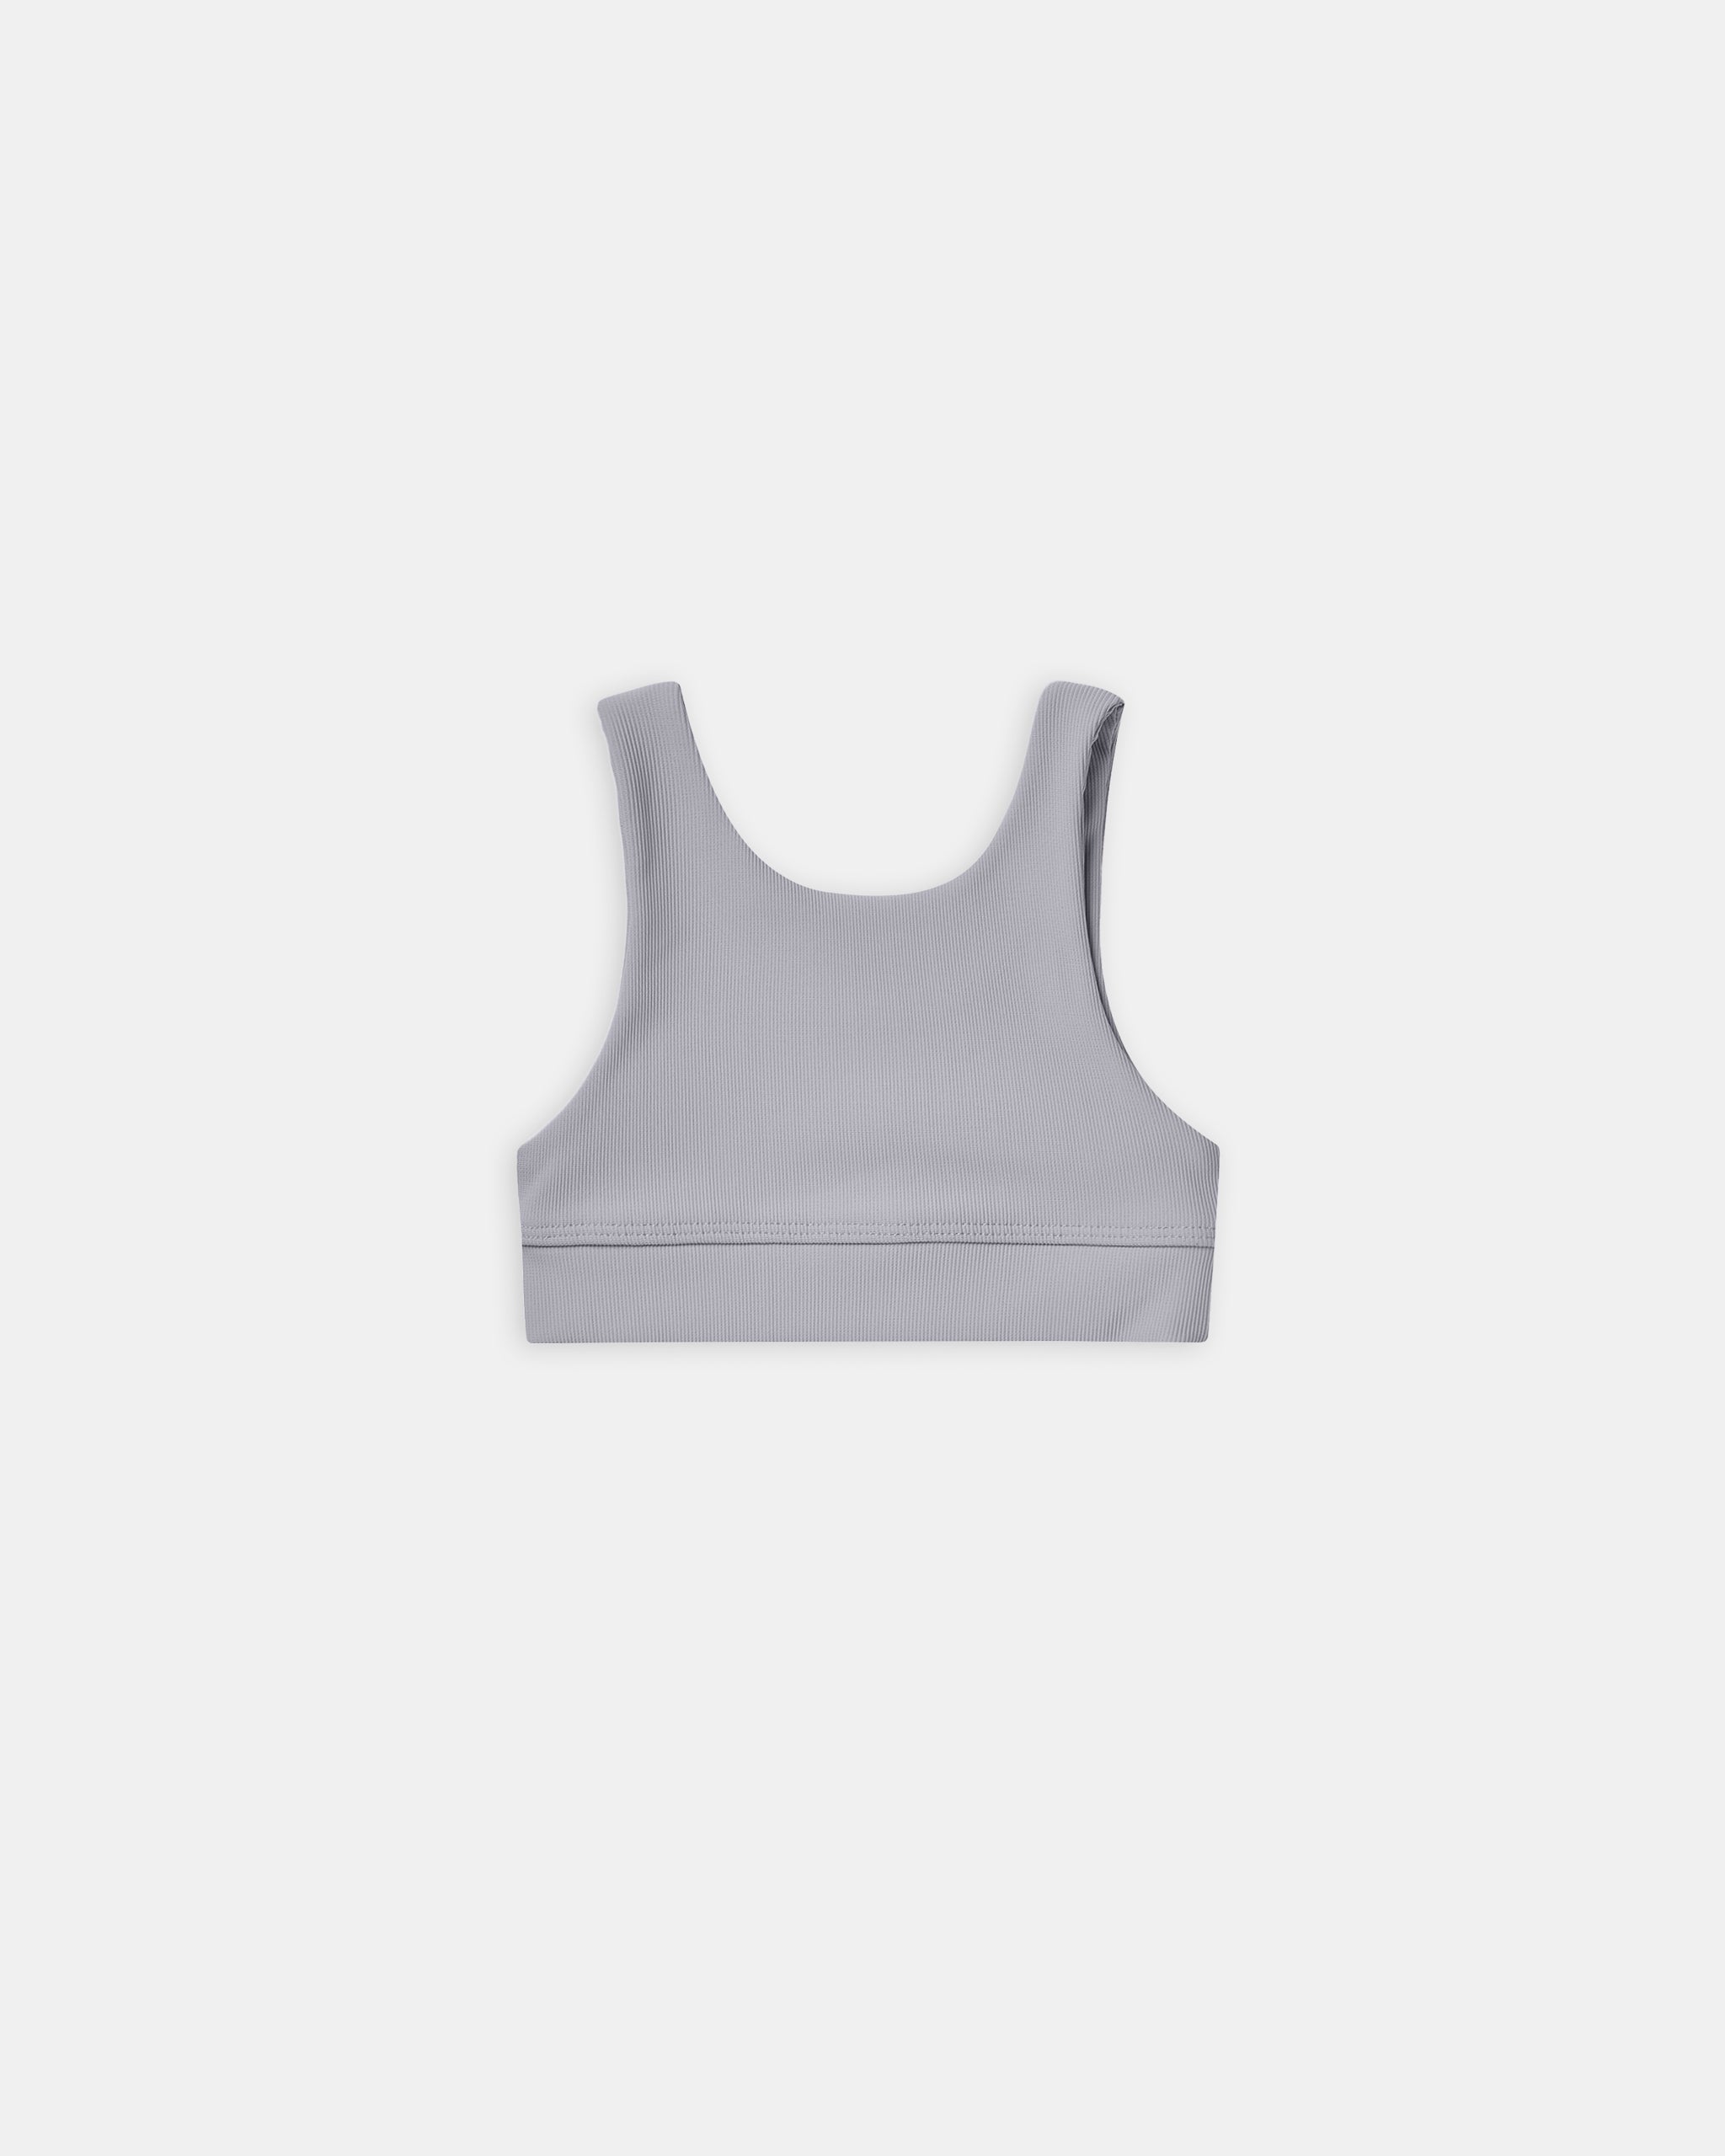 Swift Sports Bra | Periwinkle Ribbed - Rylee + Cru | Kids Clothes | Trendy Baby Clothes | Modern Infant Outfits |